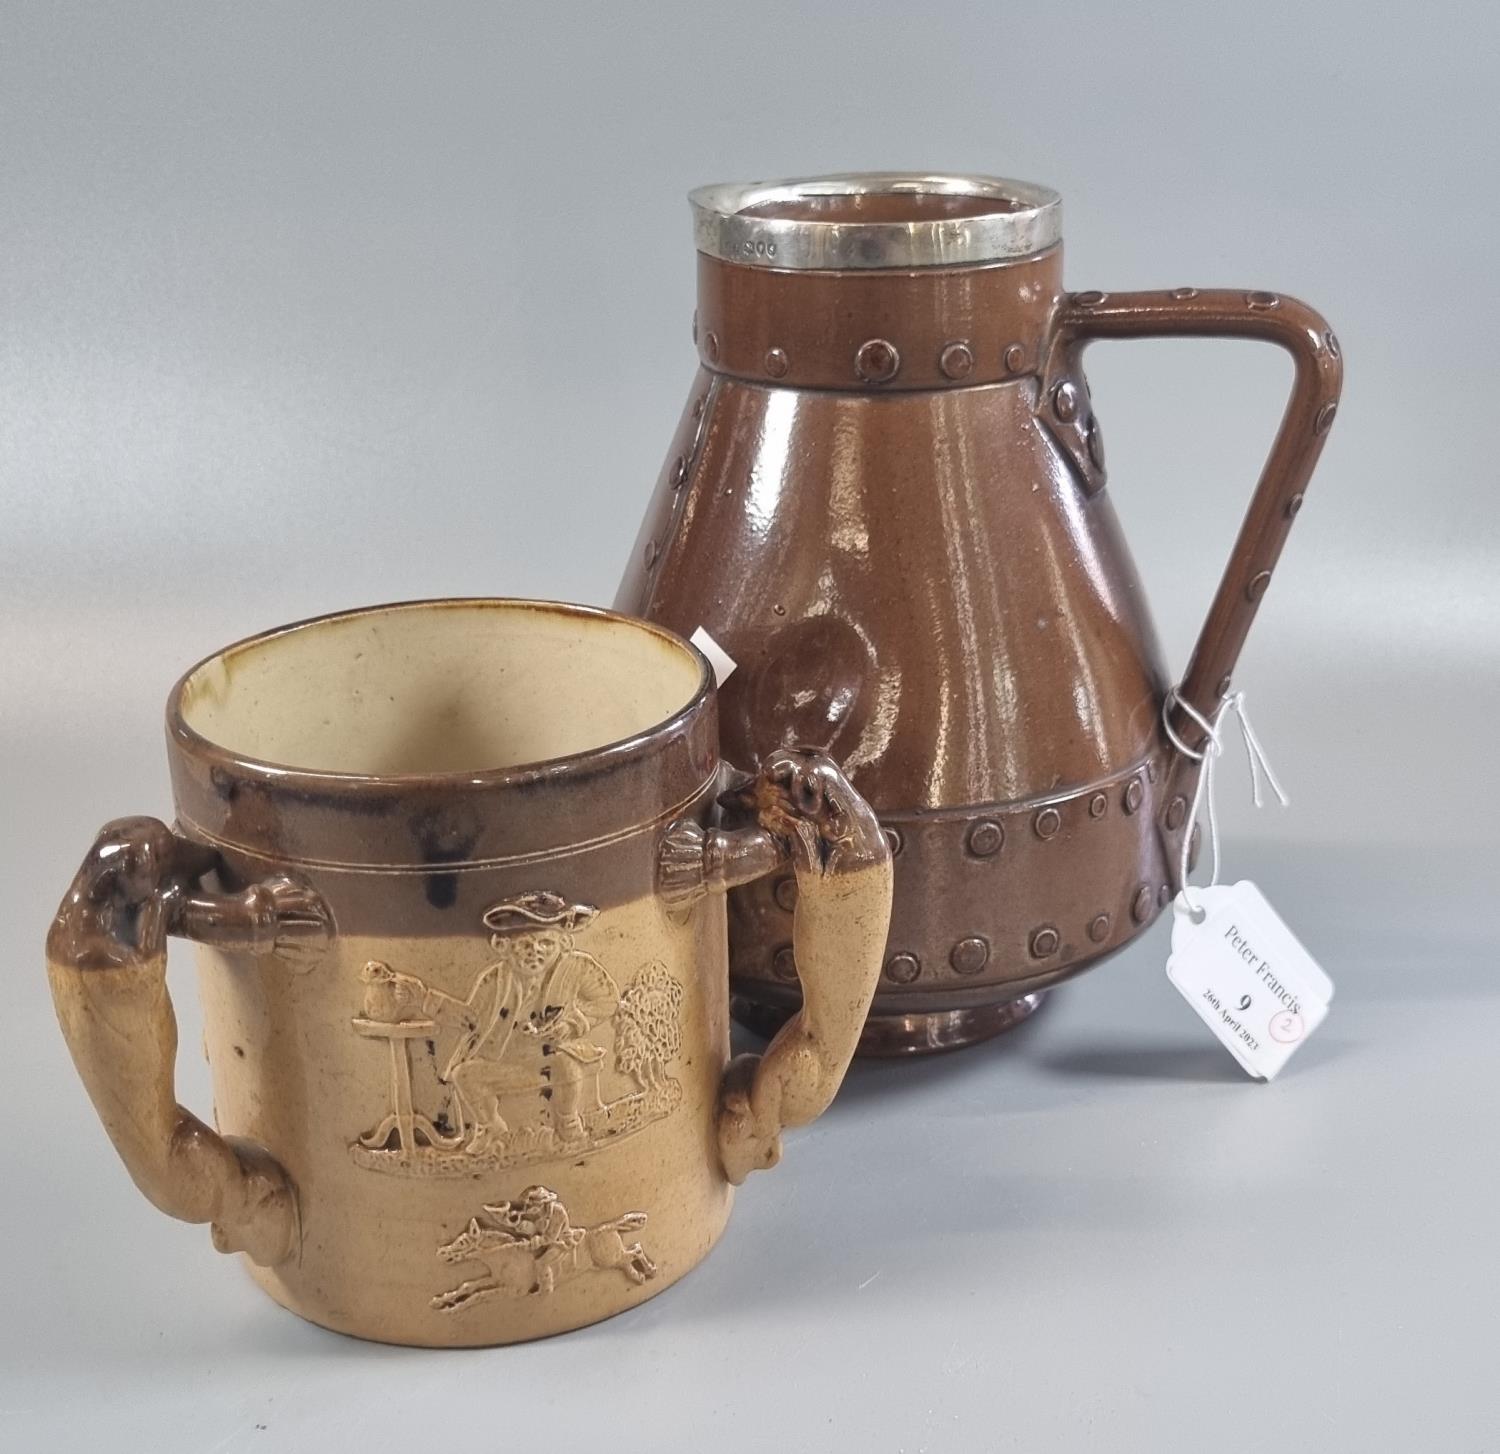 Doulton Lambeth Silicon 9037 ceramic jug in the form of a leather flagon with silver collar,